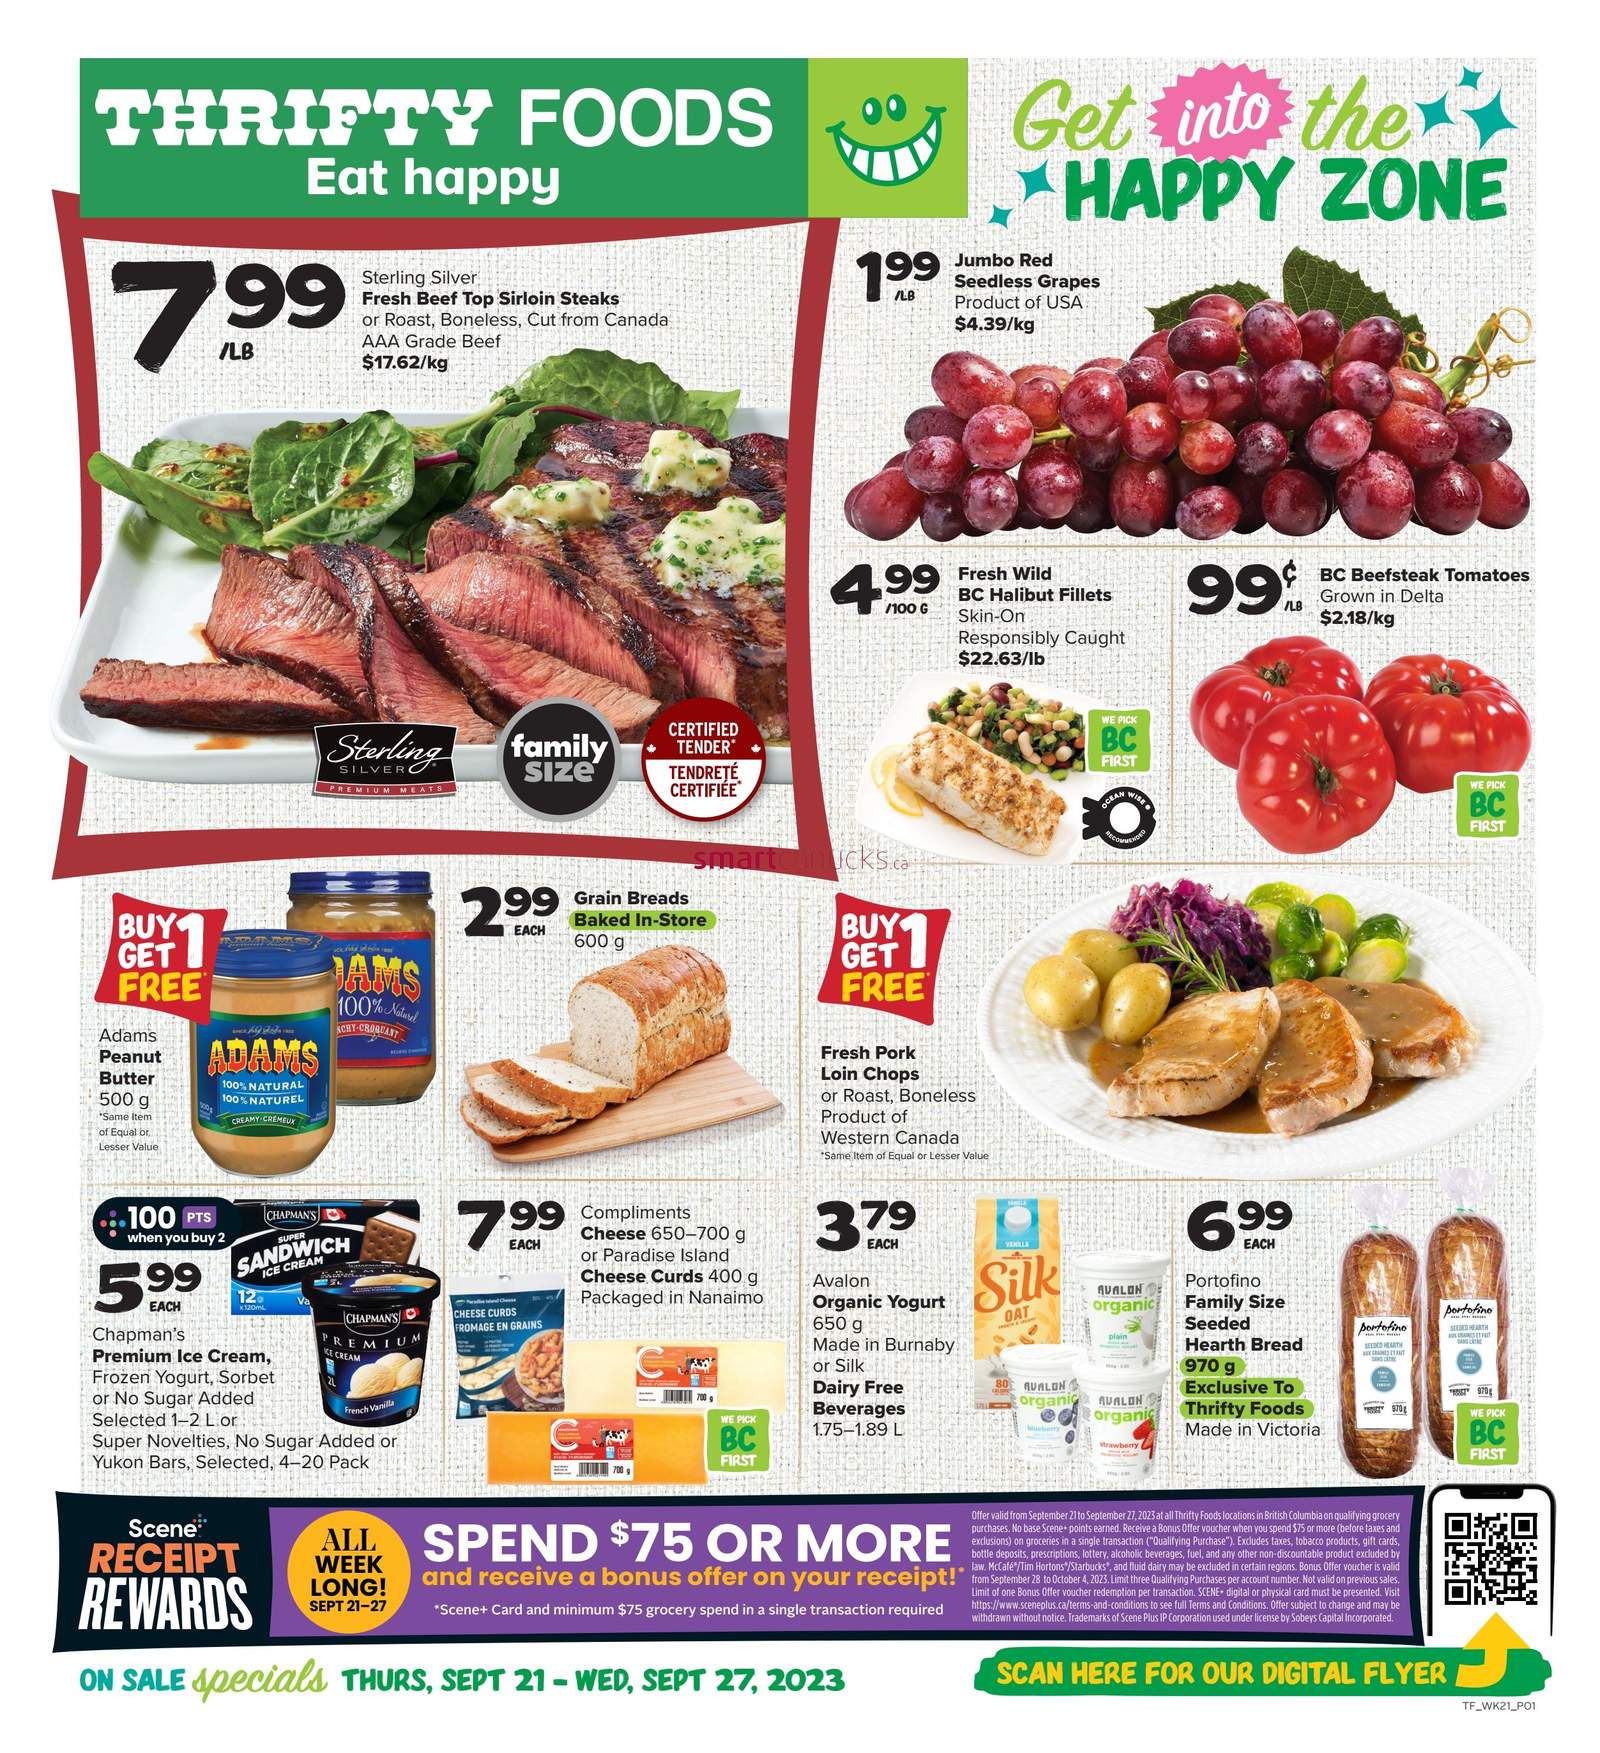 Thrifty grocery specials